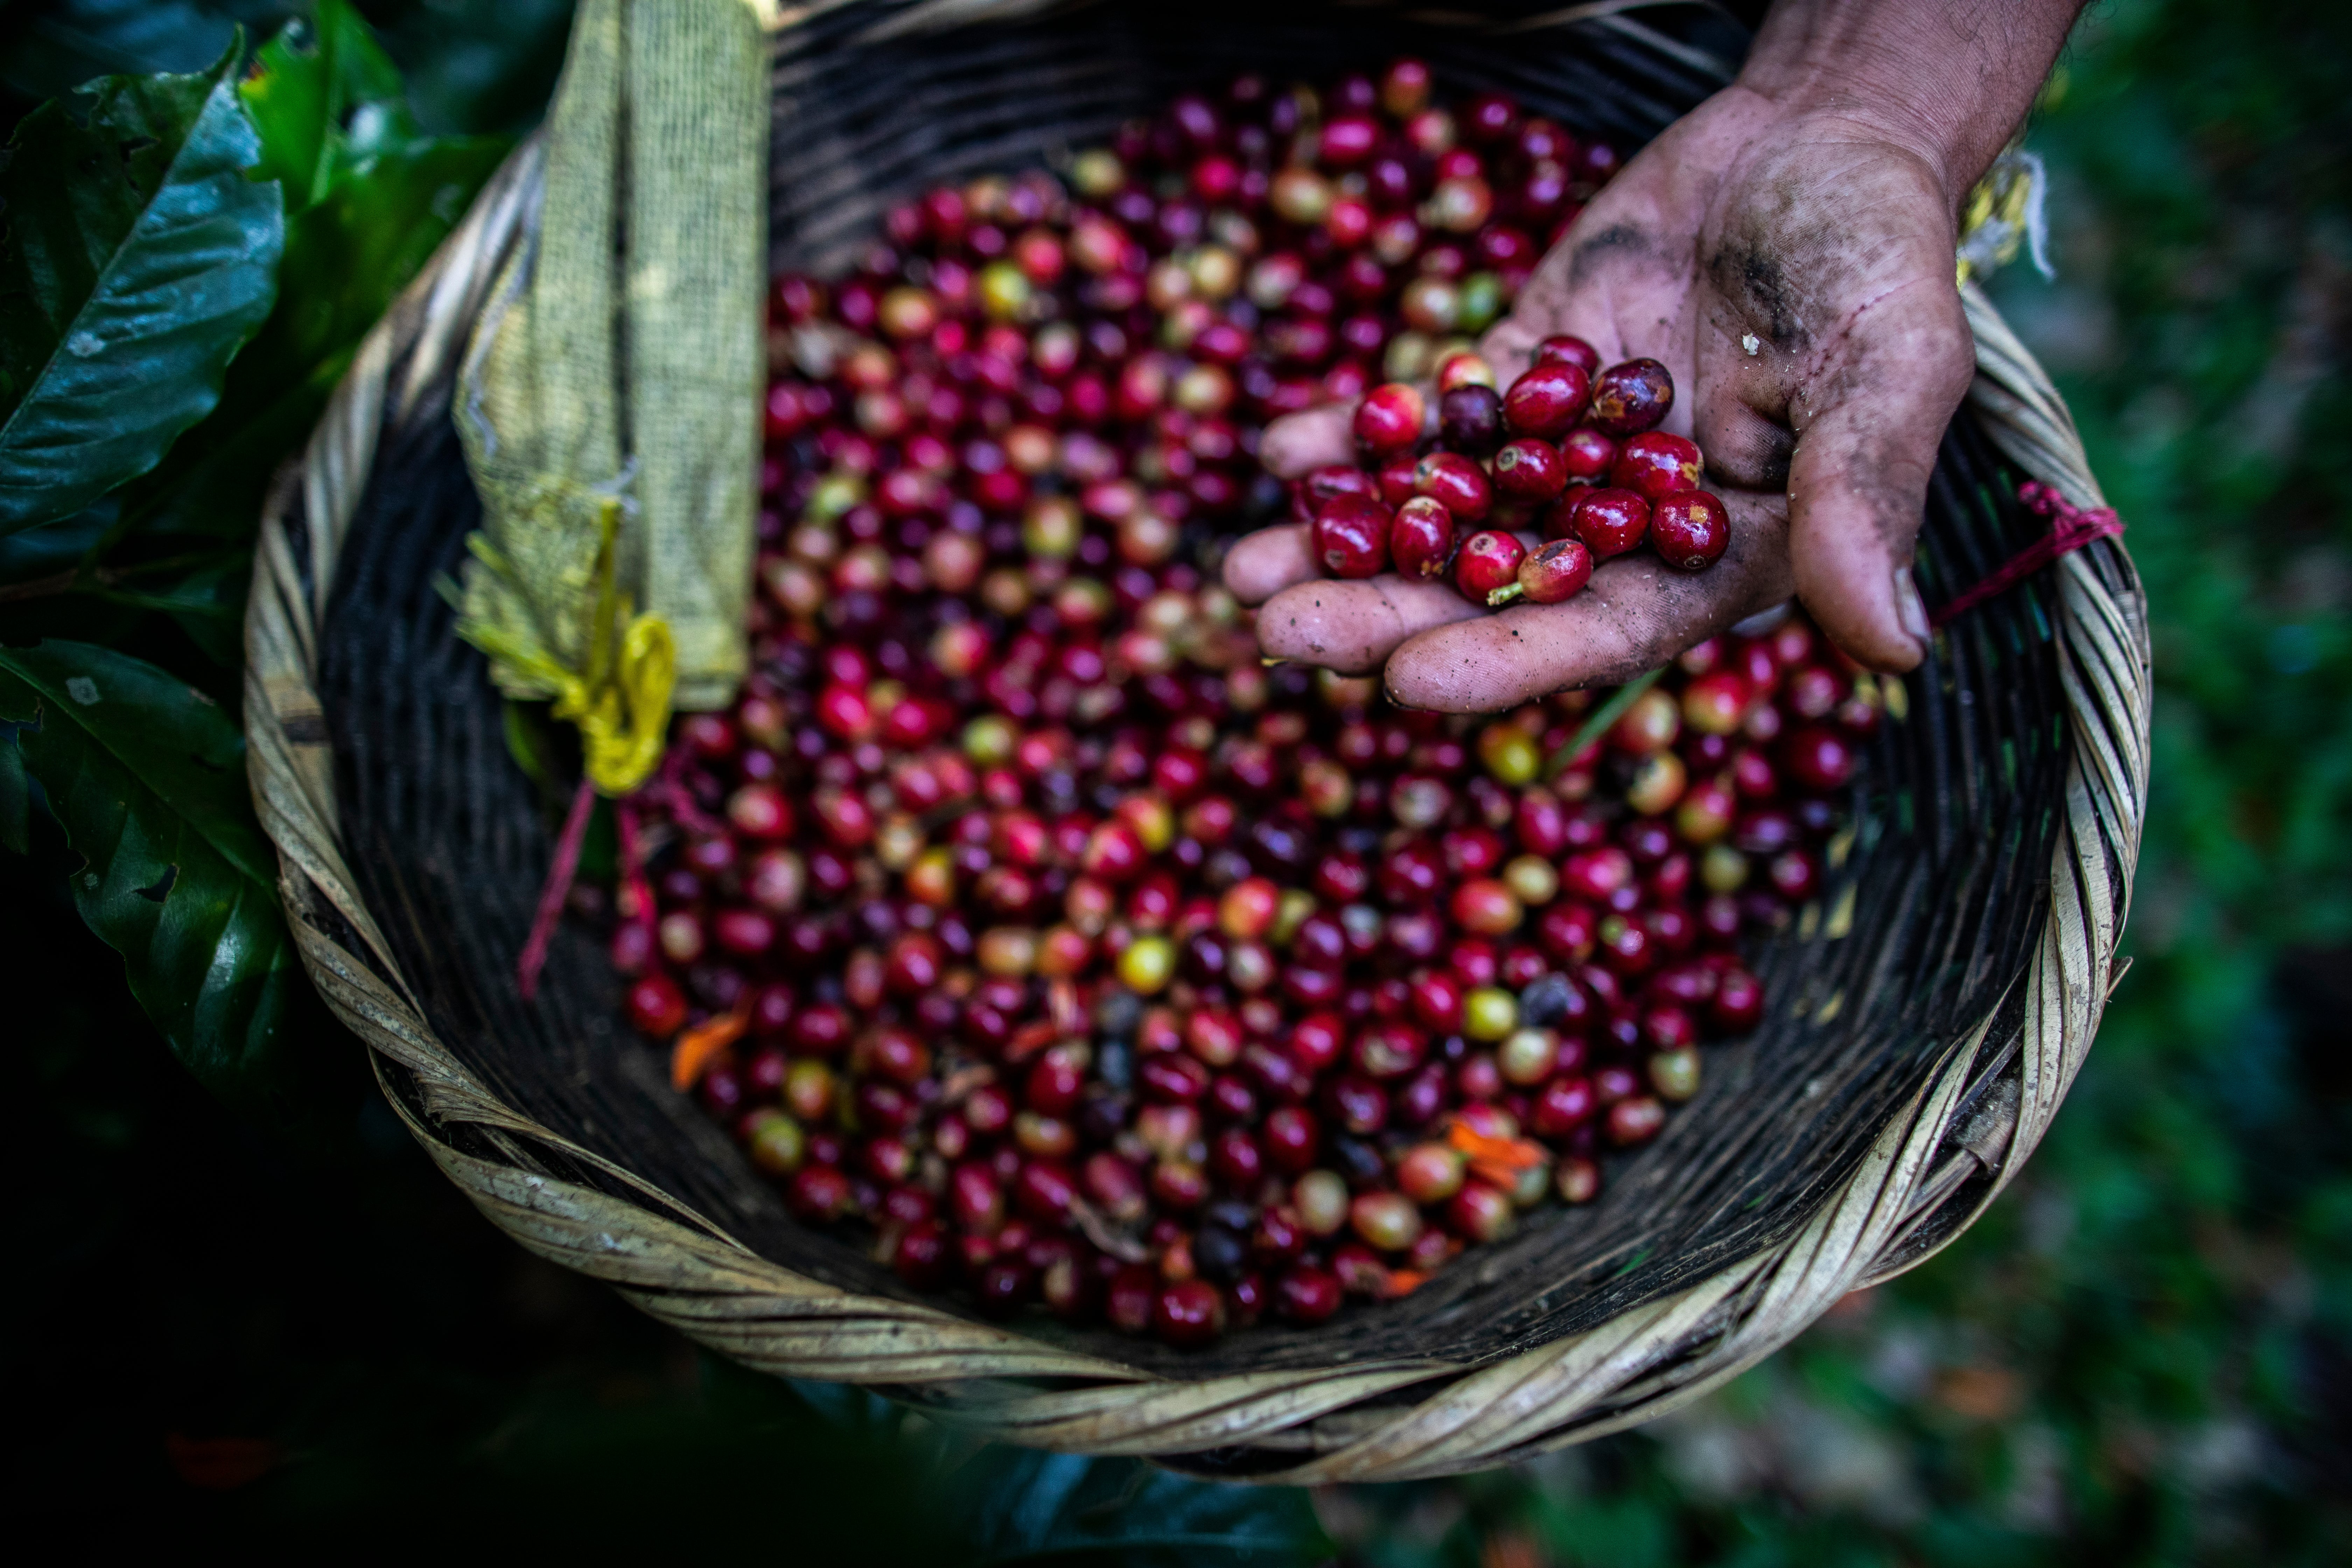 A coffee harvest worker shows coffee cherries recently collected at La Hammonia Coffee Farm